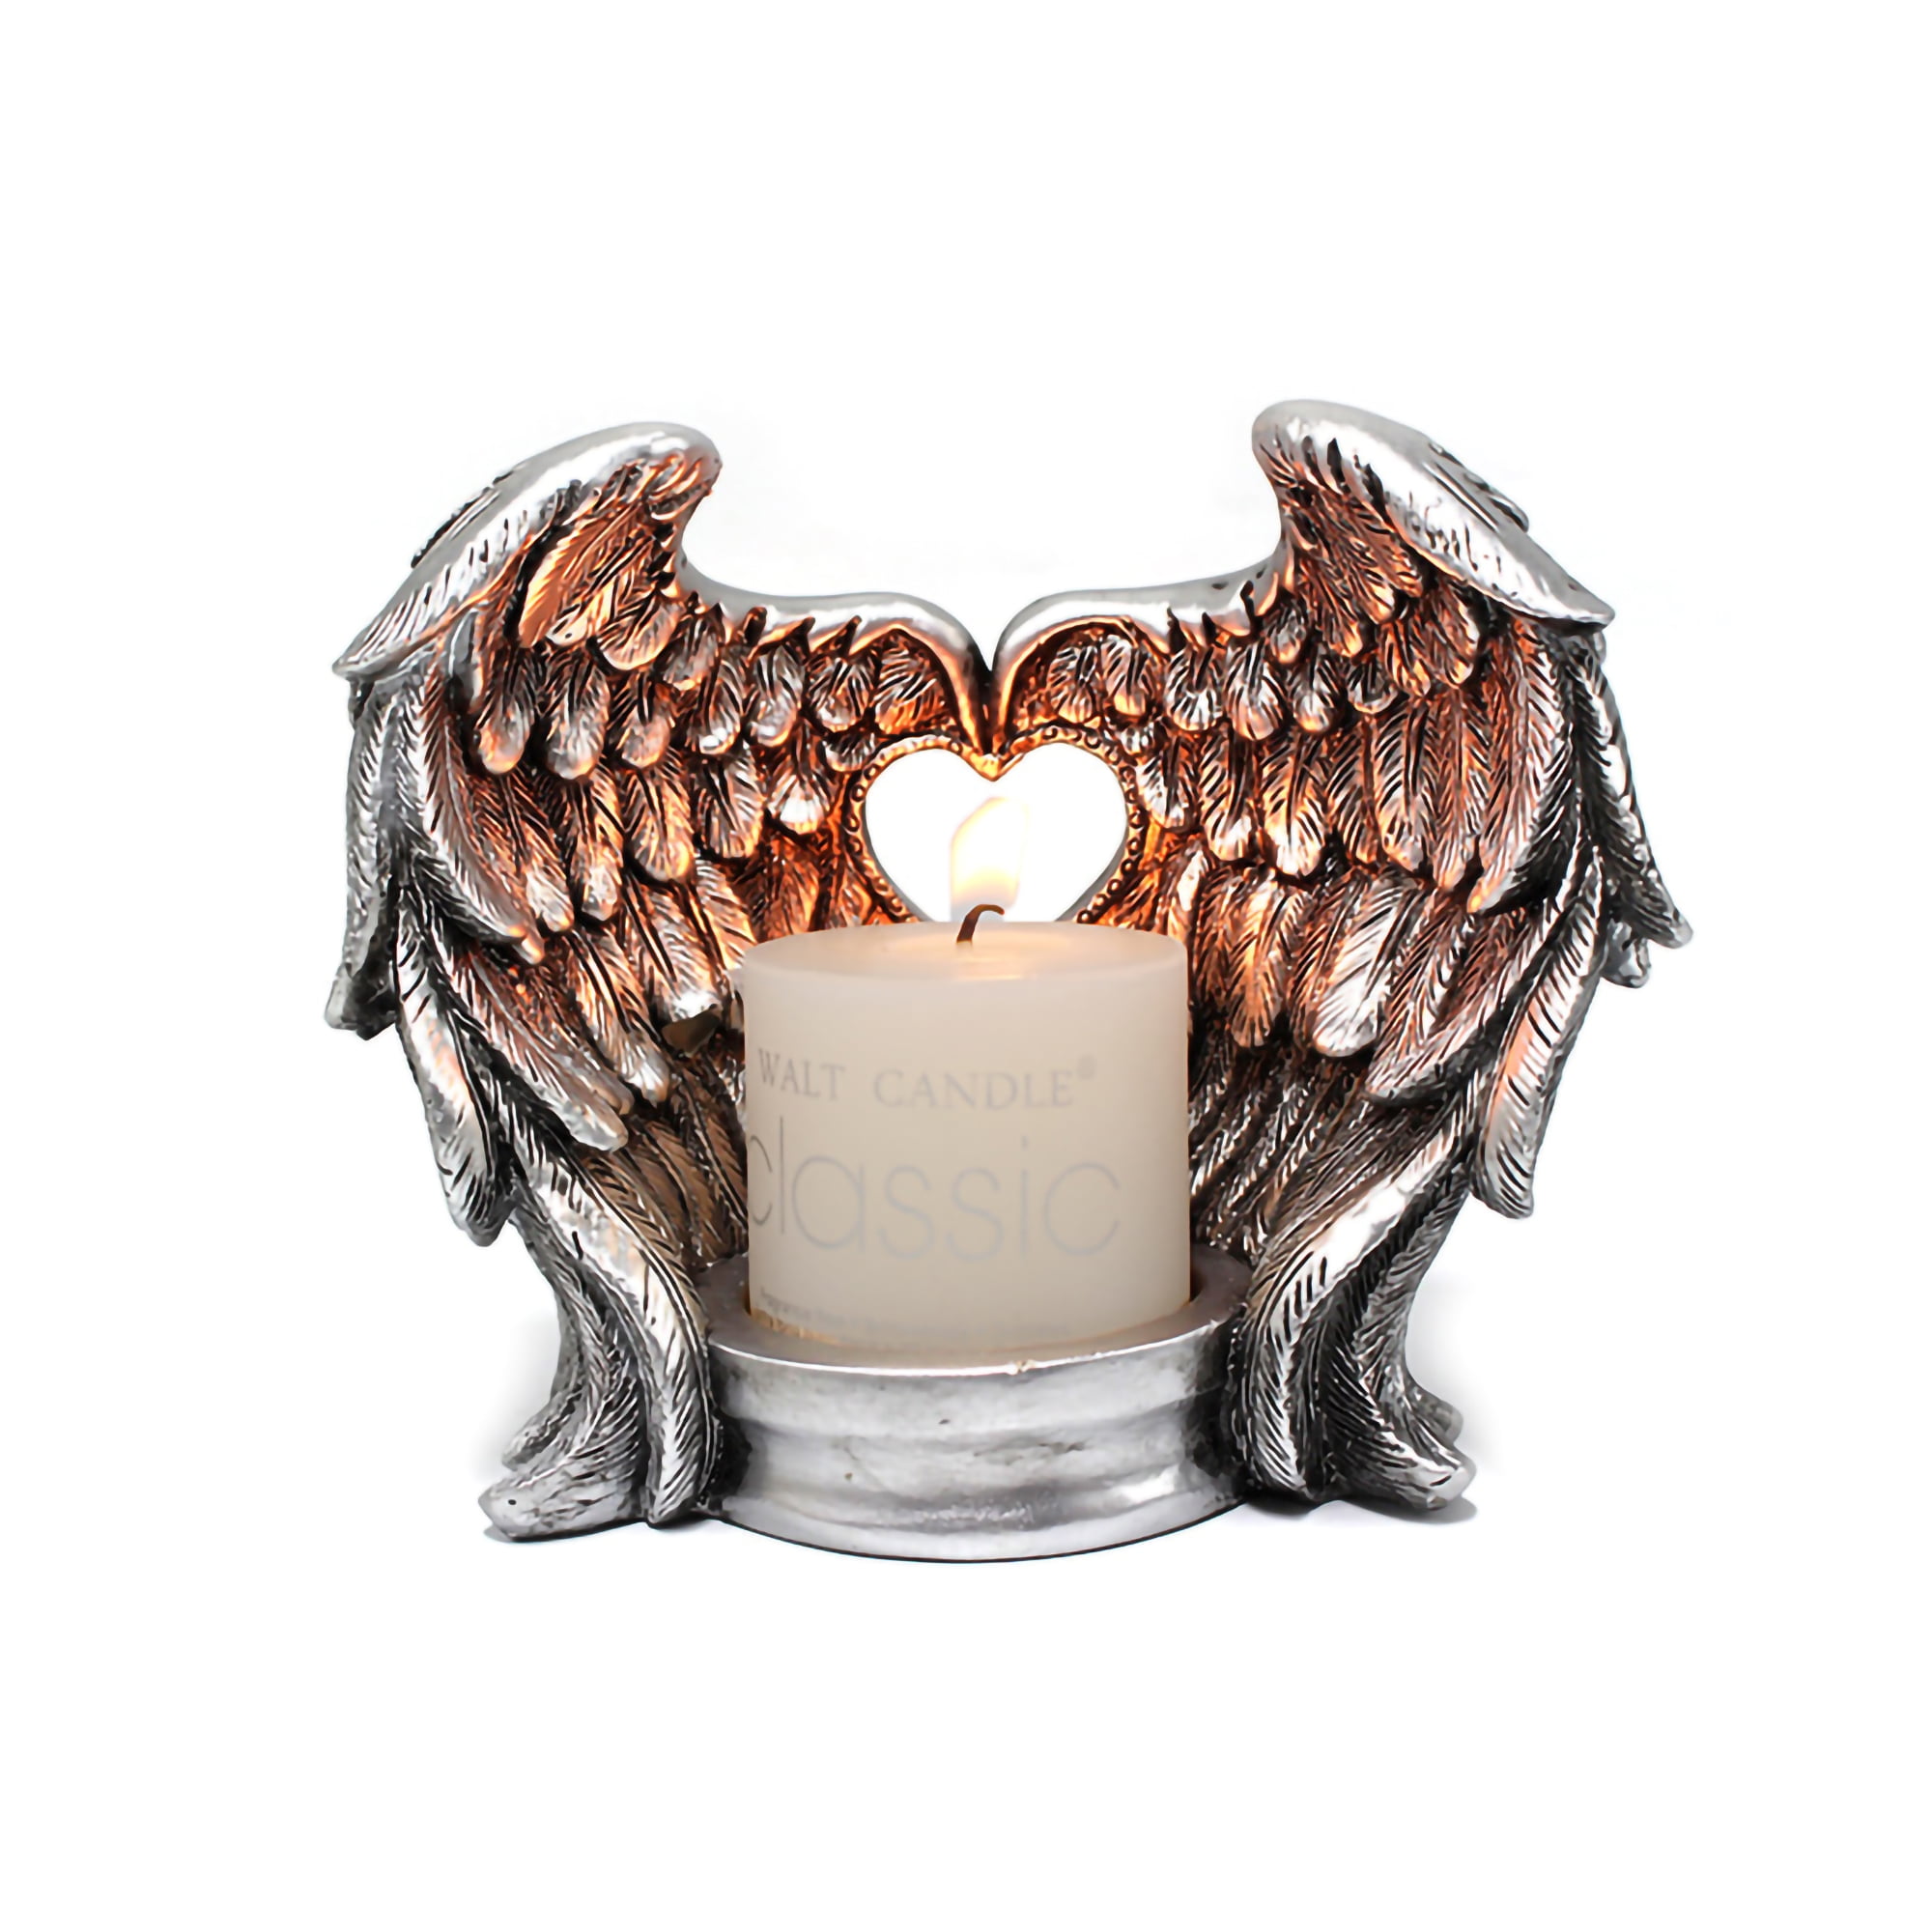 White Angel Wings Votive Candle Tea light Holder Home Decoration Gift 